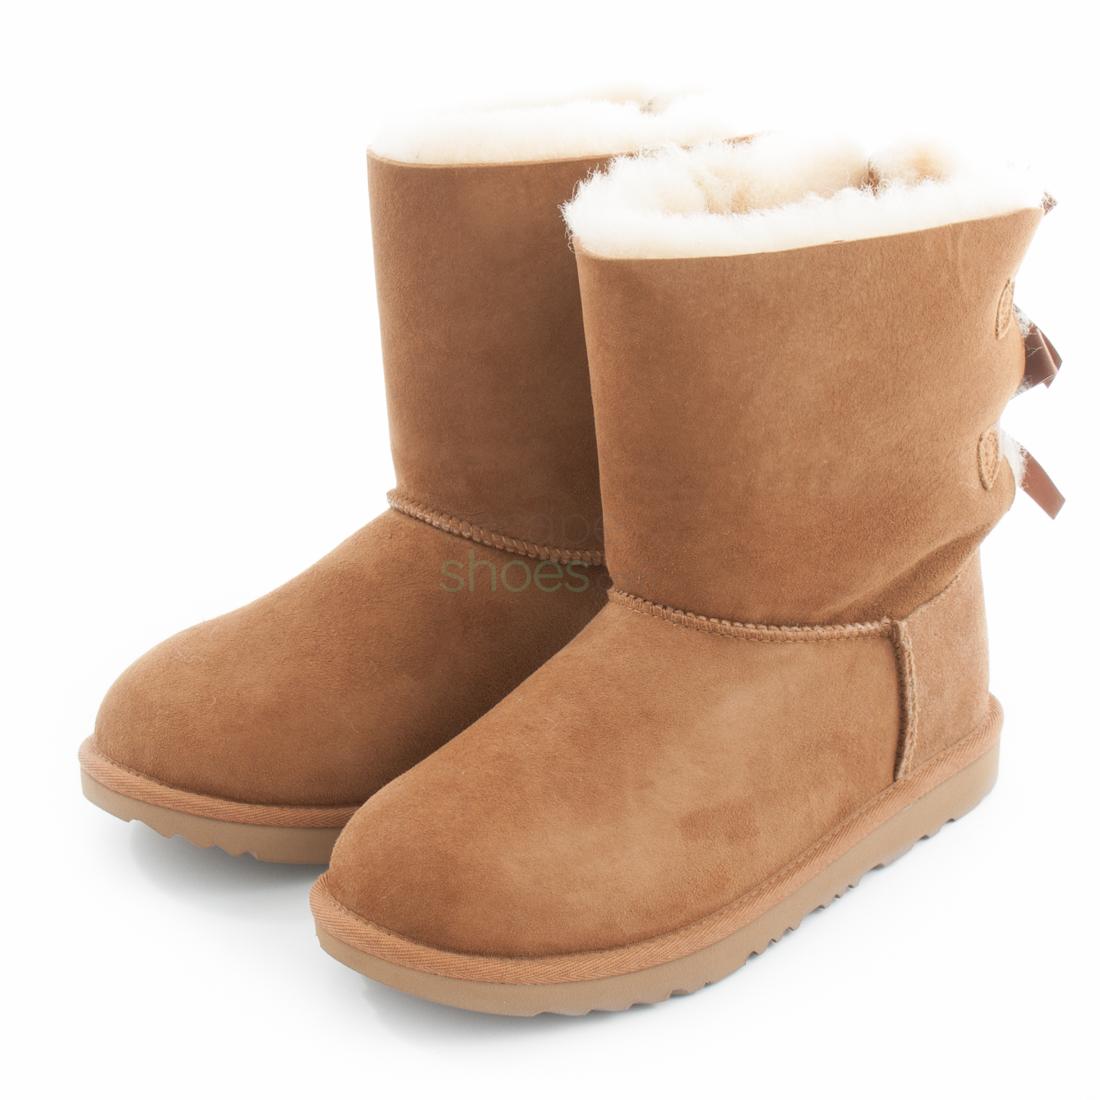 chestnut uggs with bows